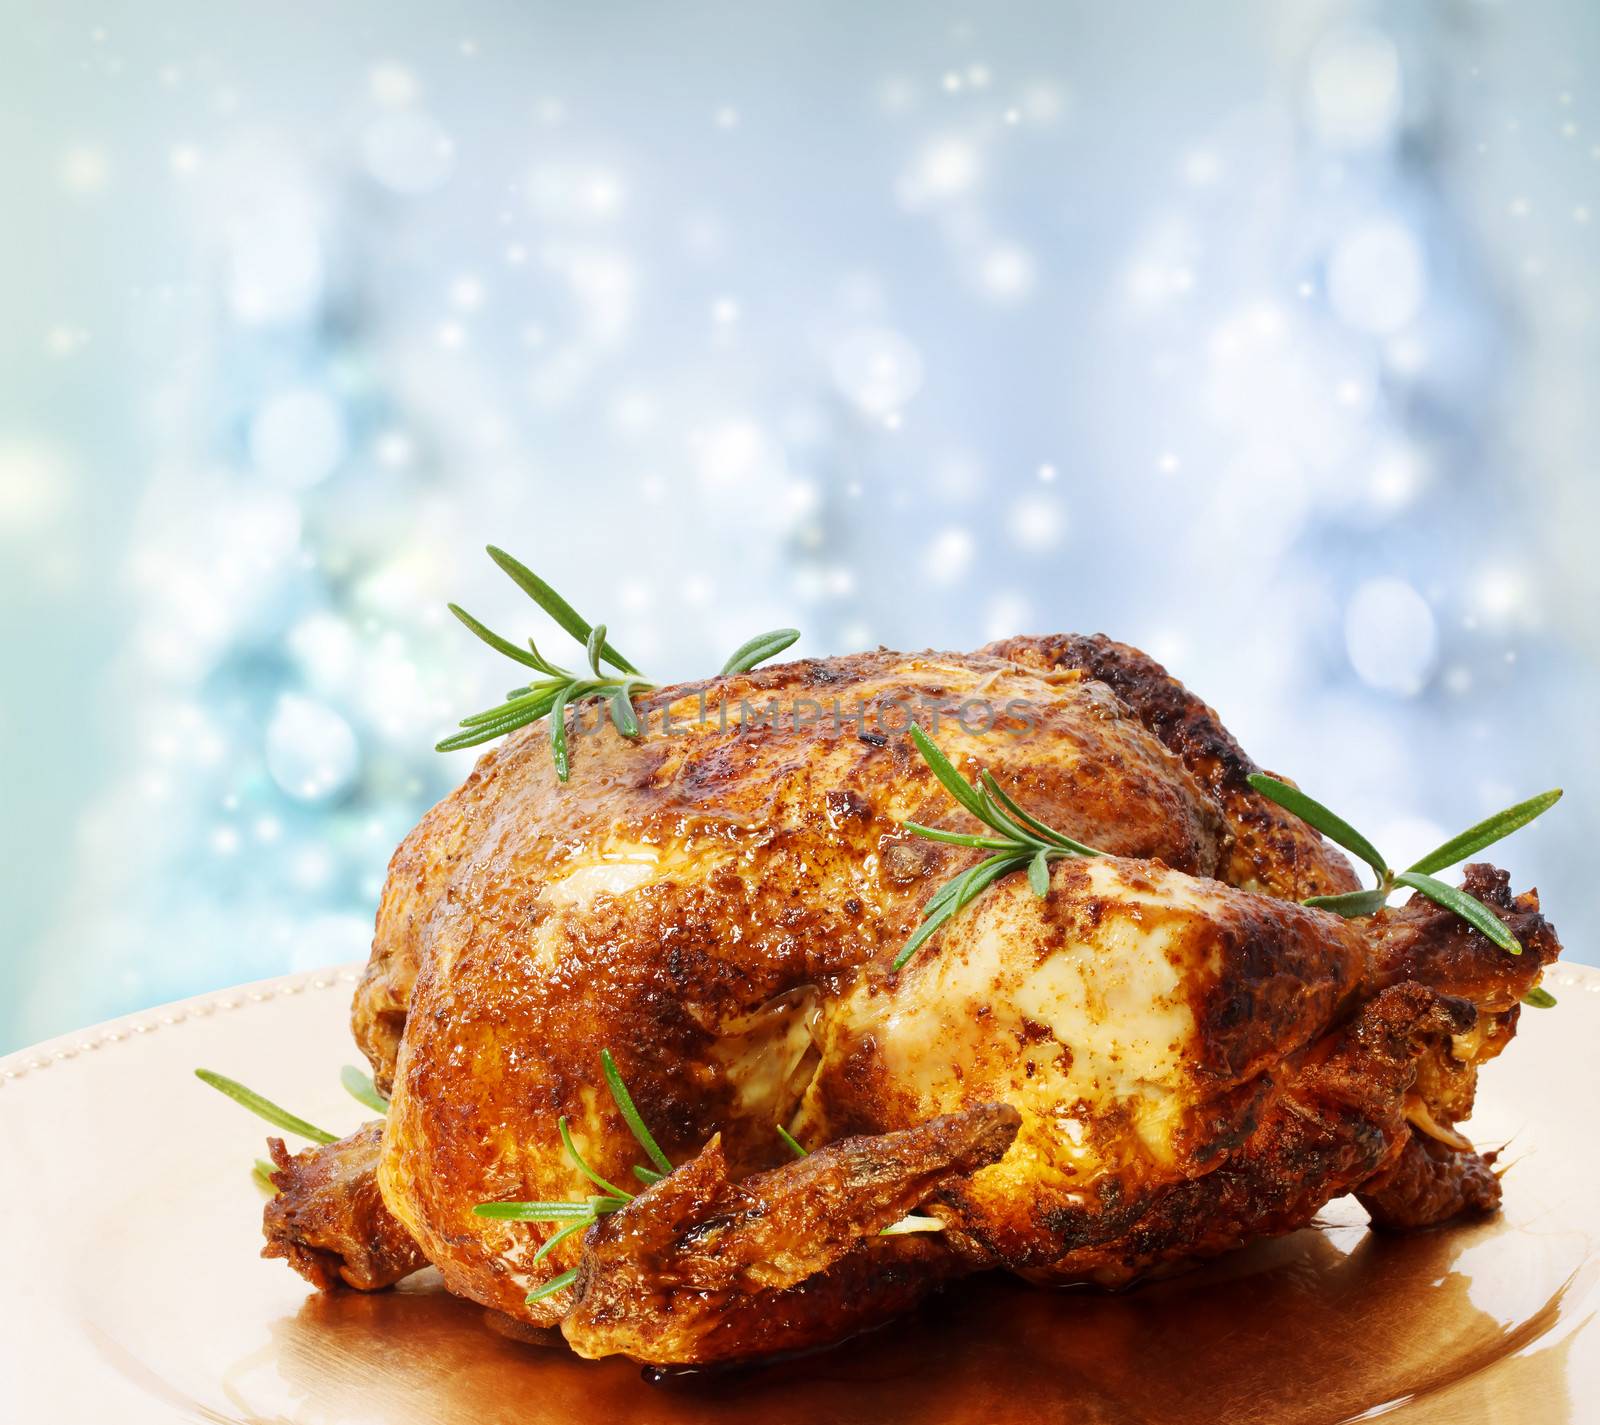 Roasted Whole Chicken with Rosemary by melpomene